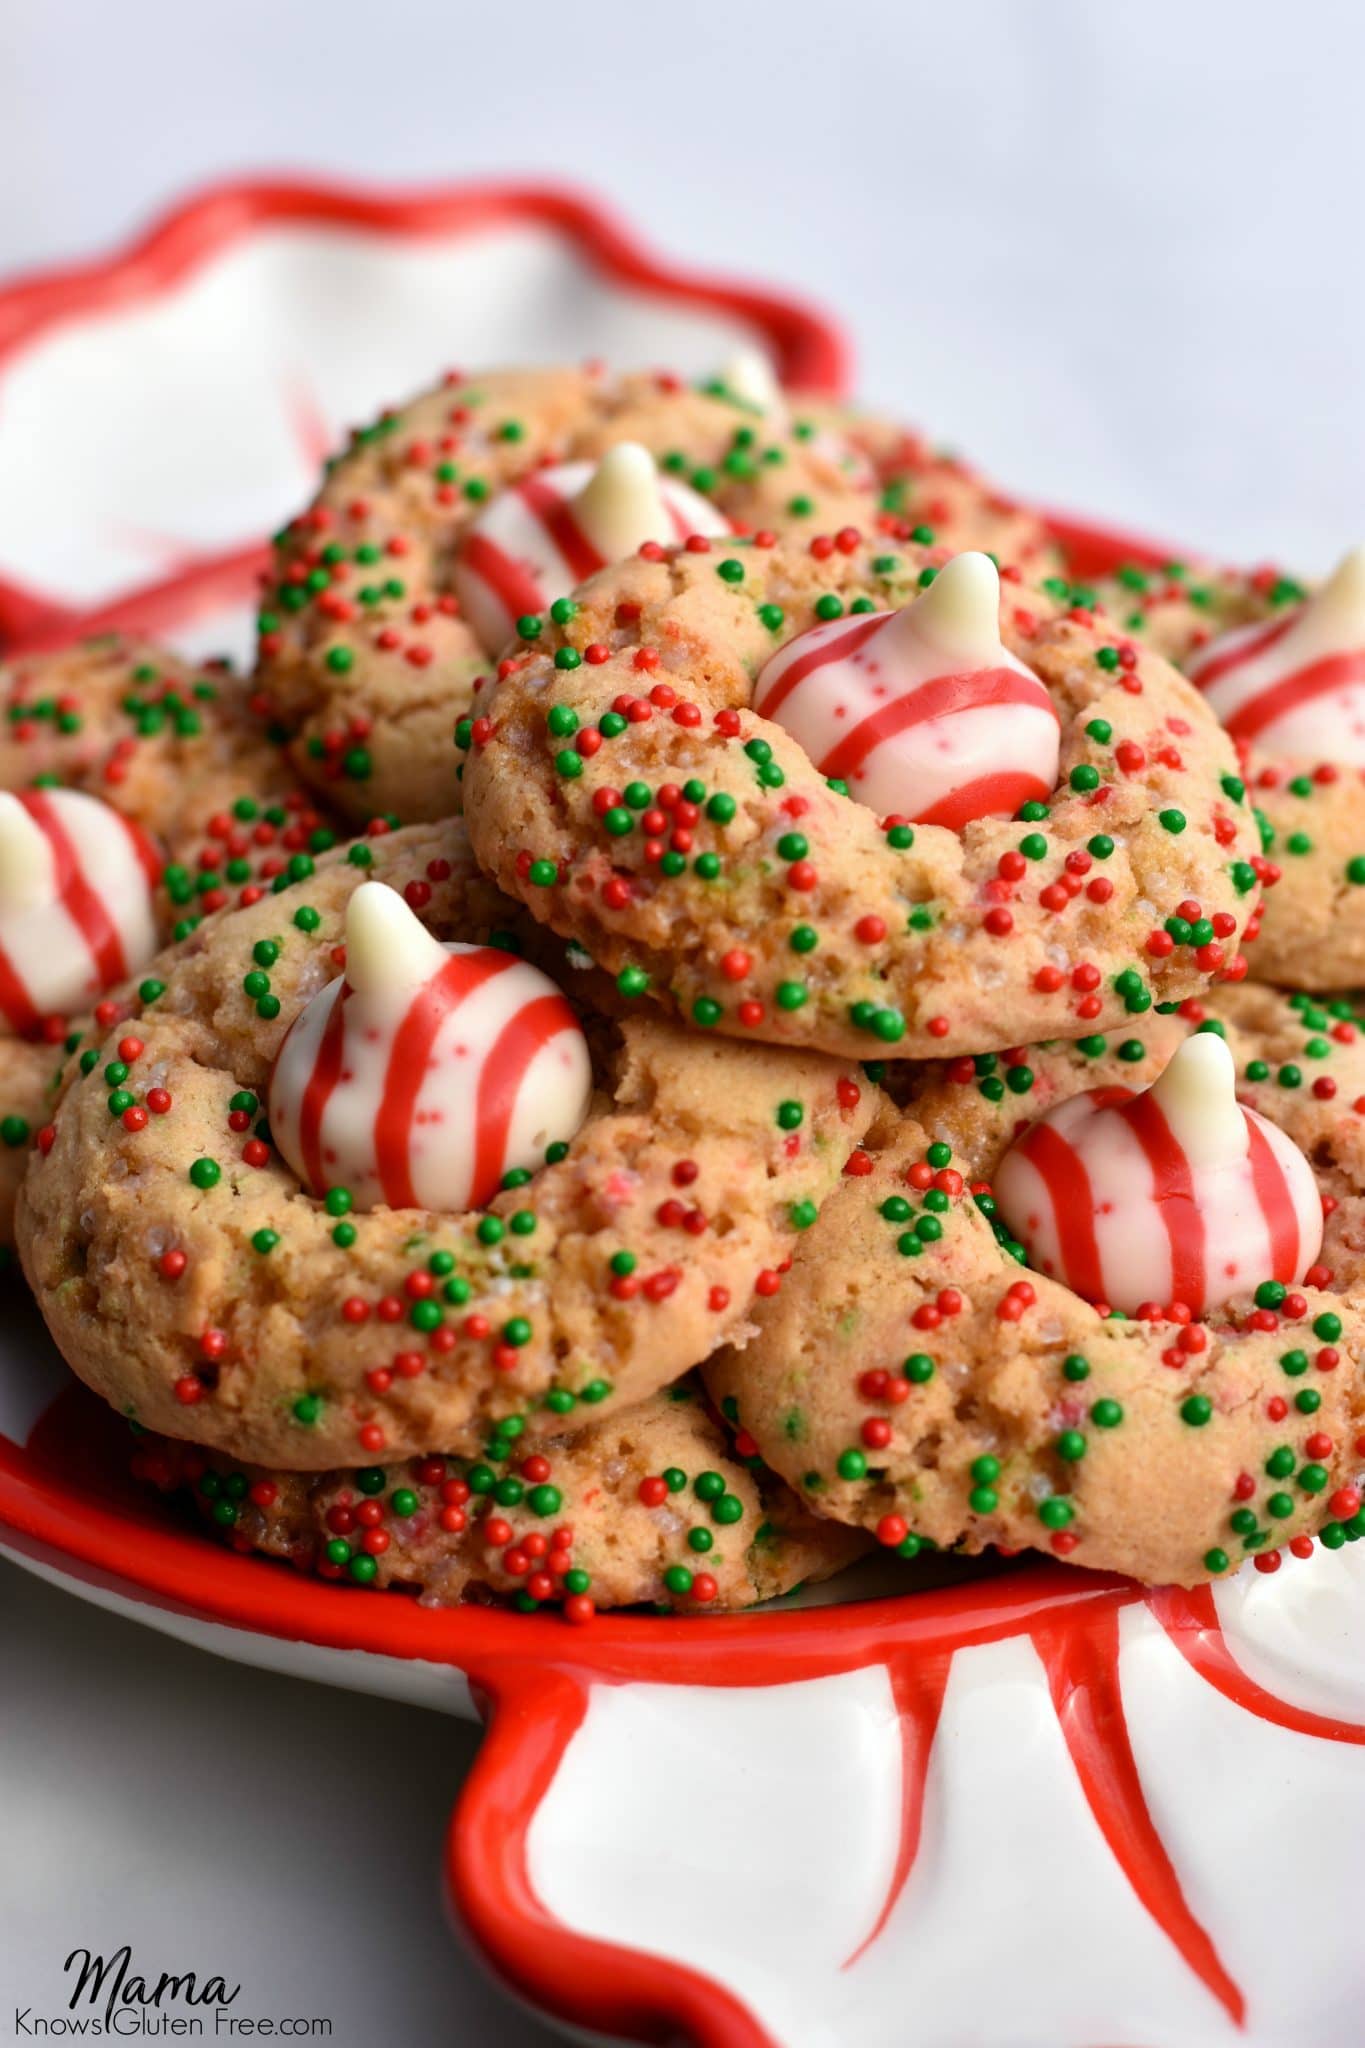 Gluten-Free Christmas Sugar Blossom Cookies stacked on a red and white plate